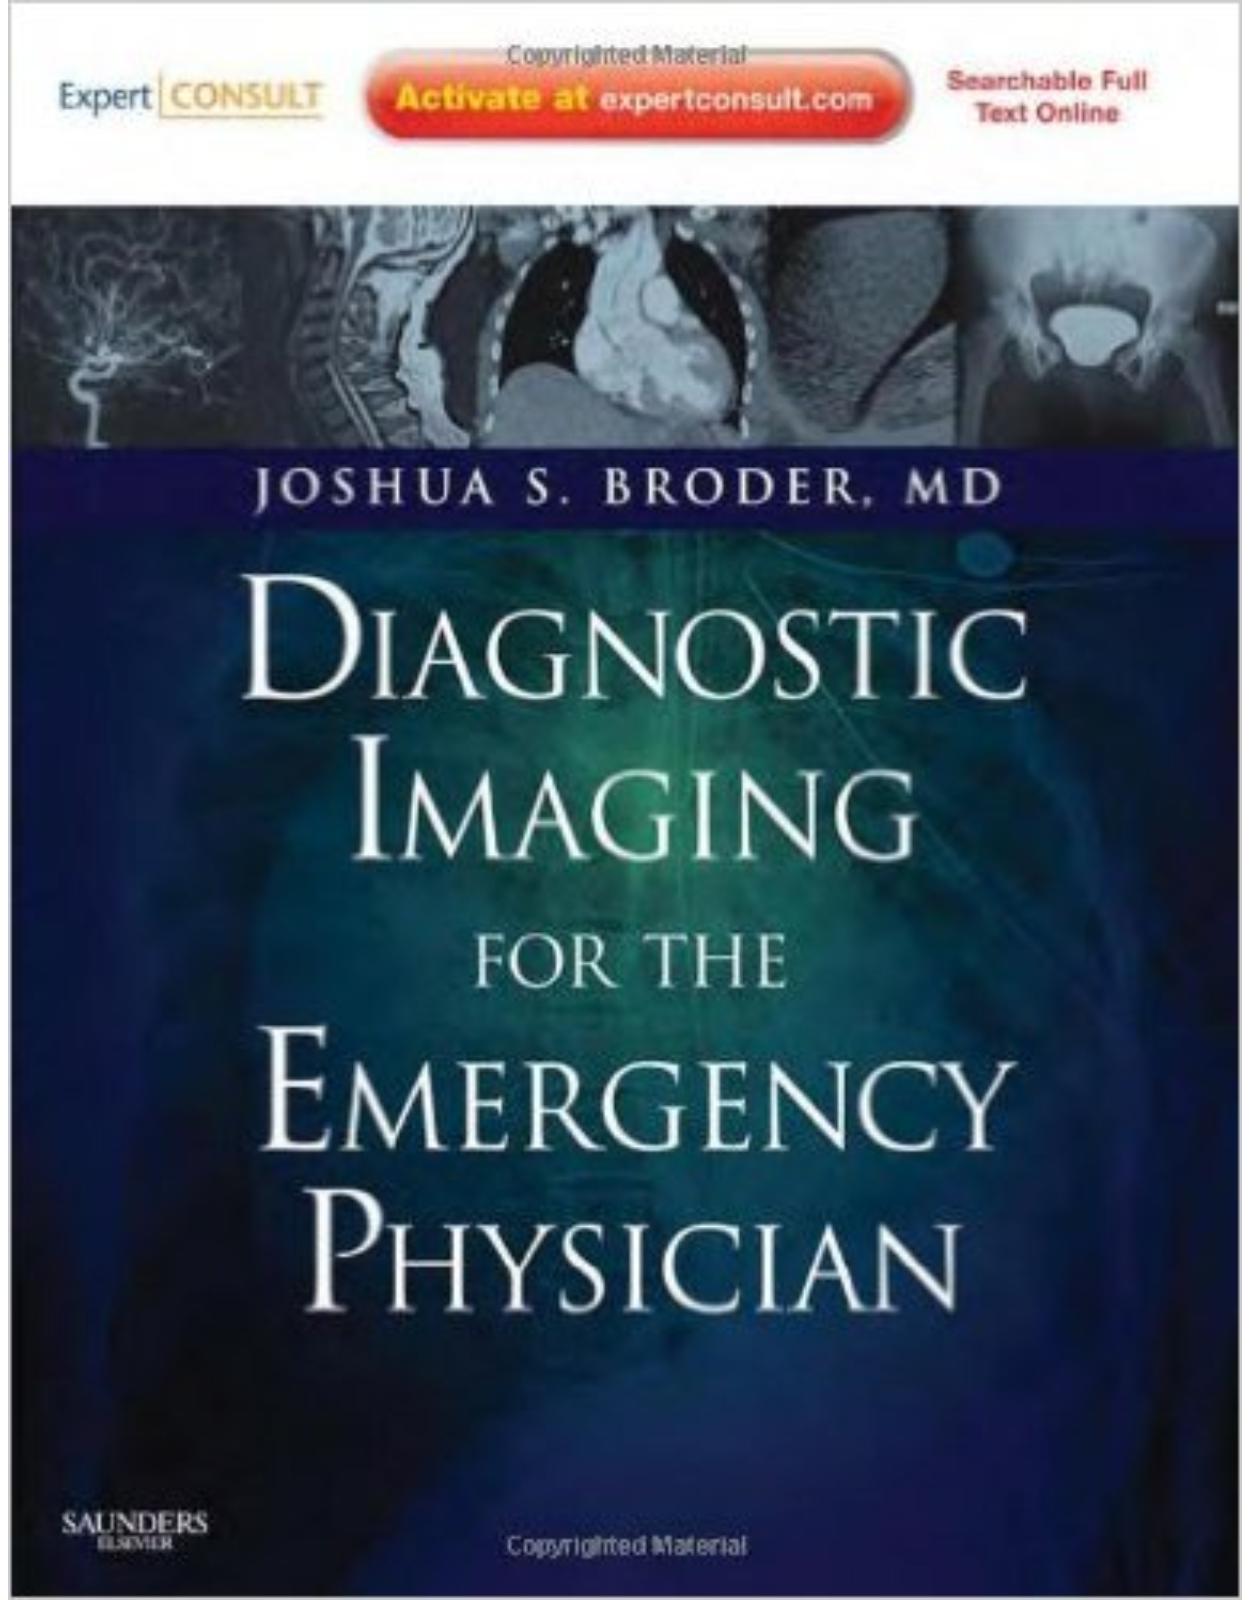 Diagnostic Imaging for the Emergency Physician: Expert Consult - Online and Print, 